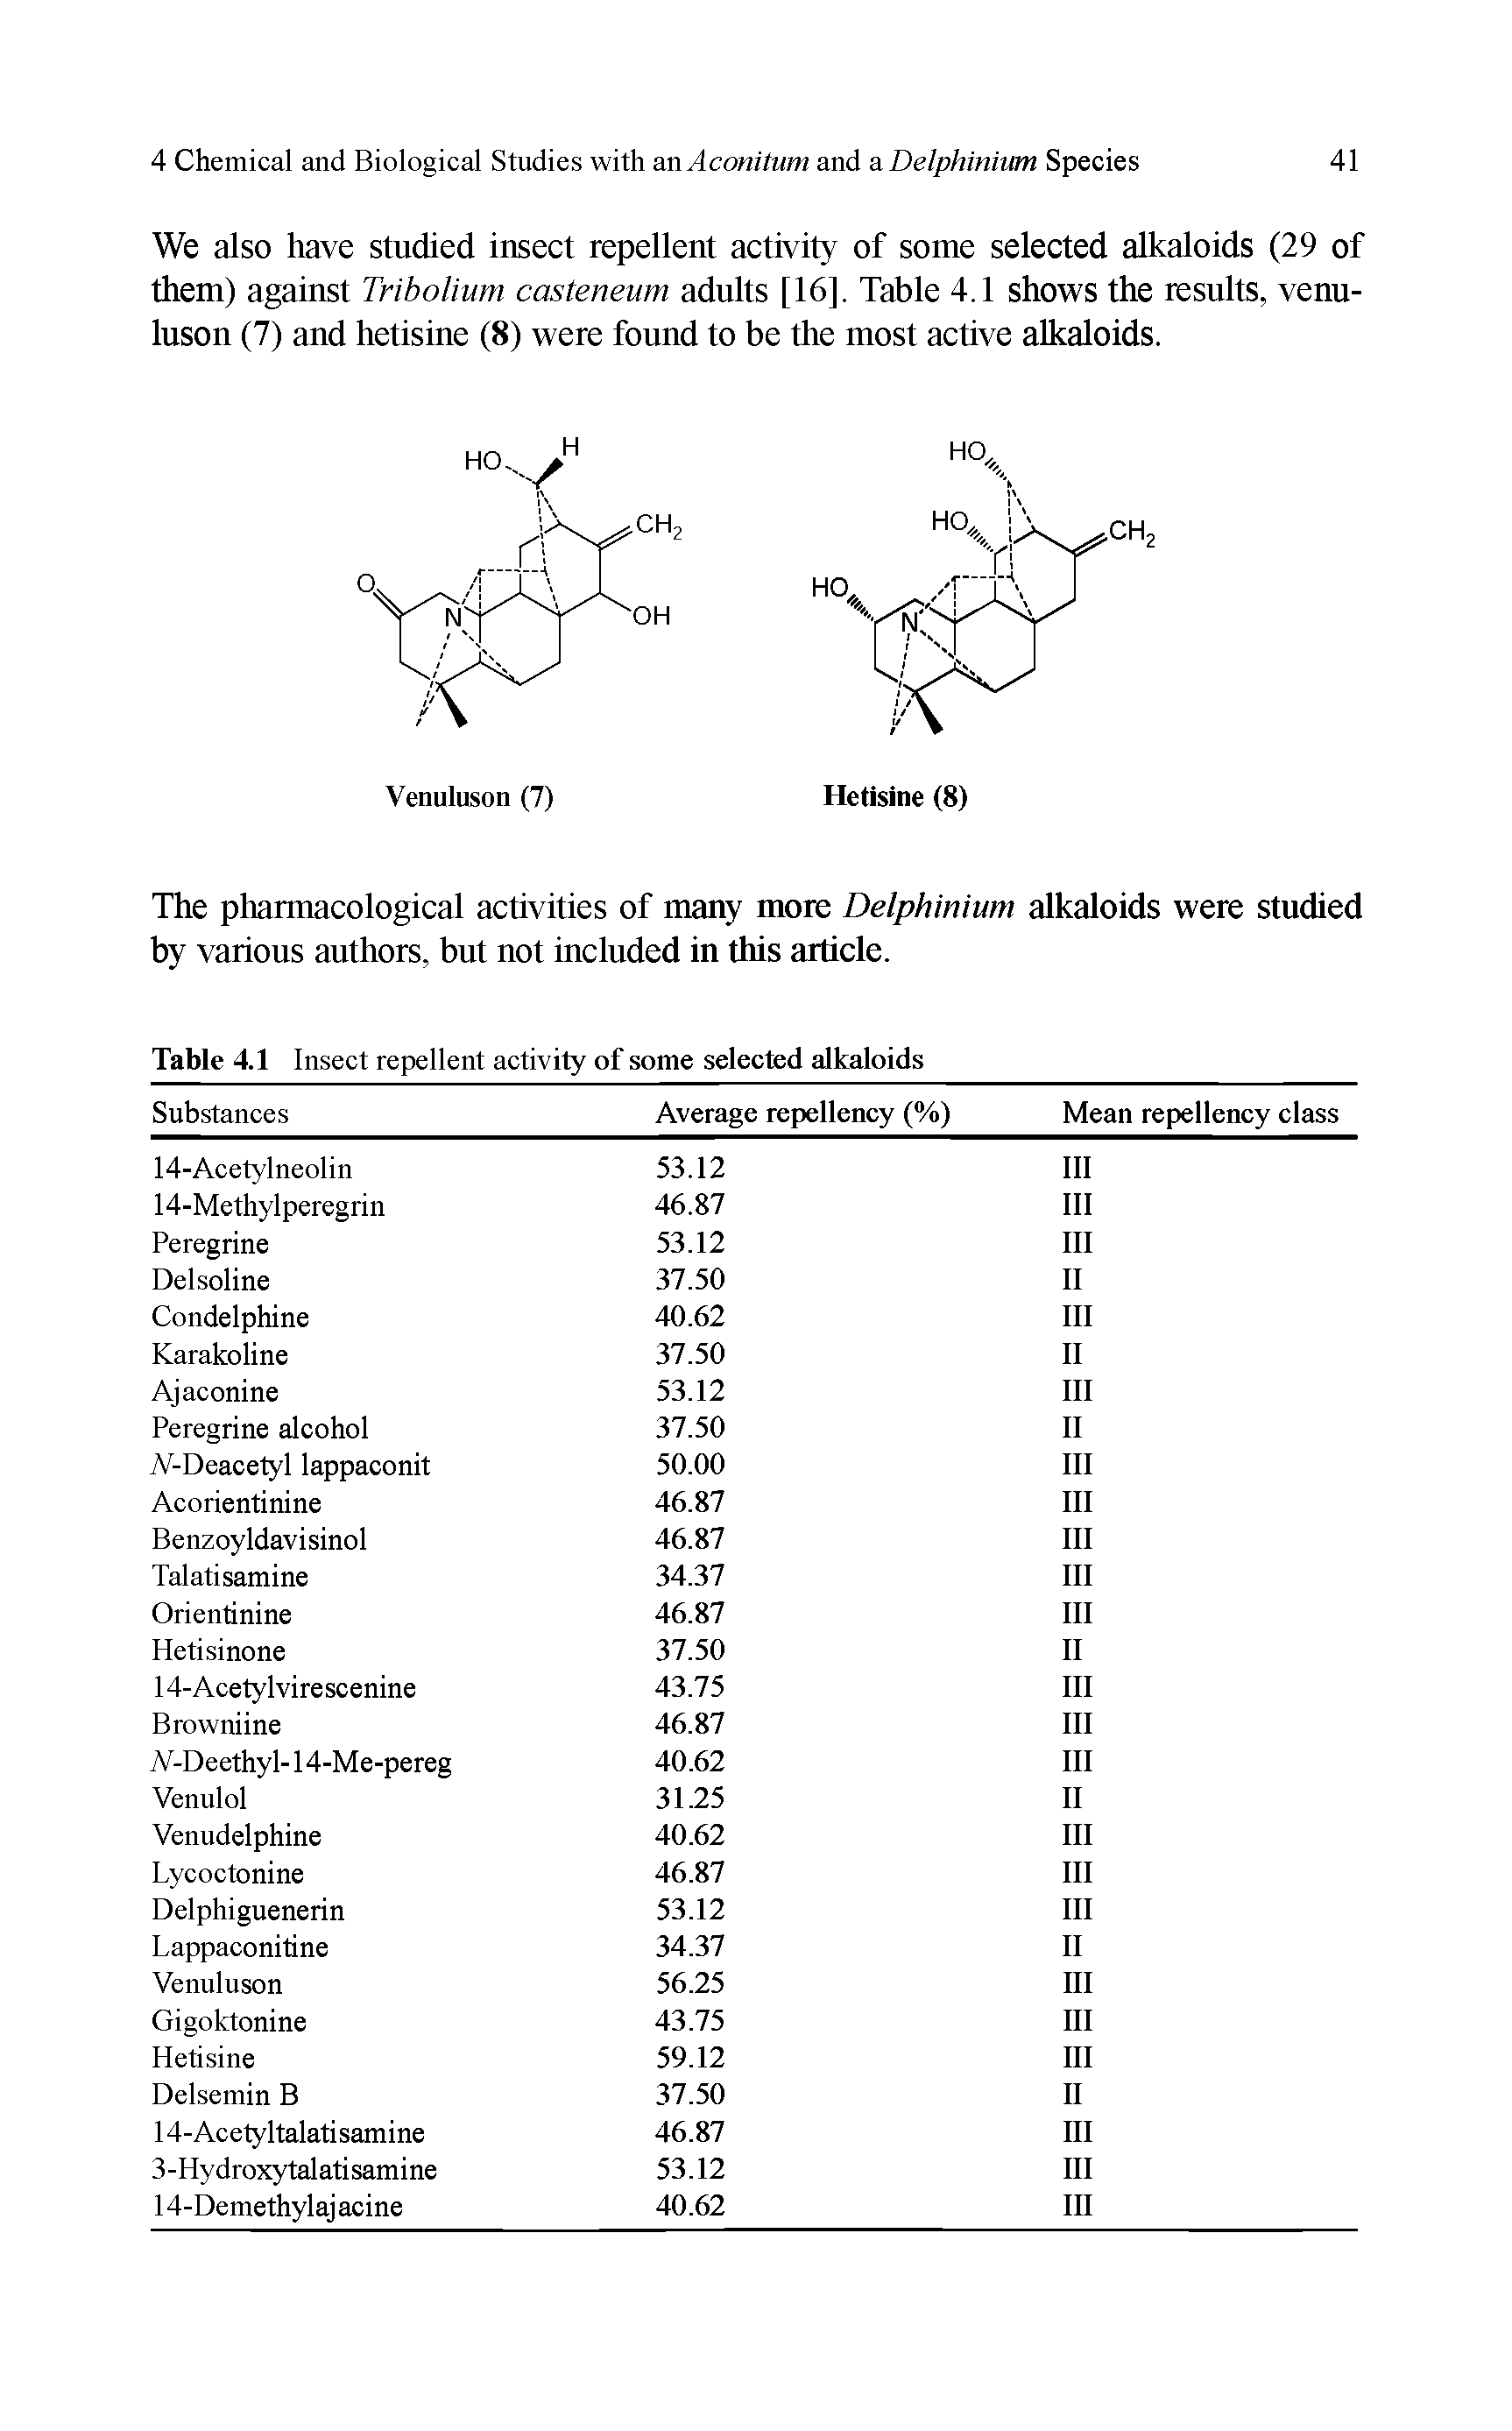 Table 4.1 Insect repellent activity of some selected alkaloids...